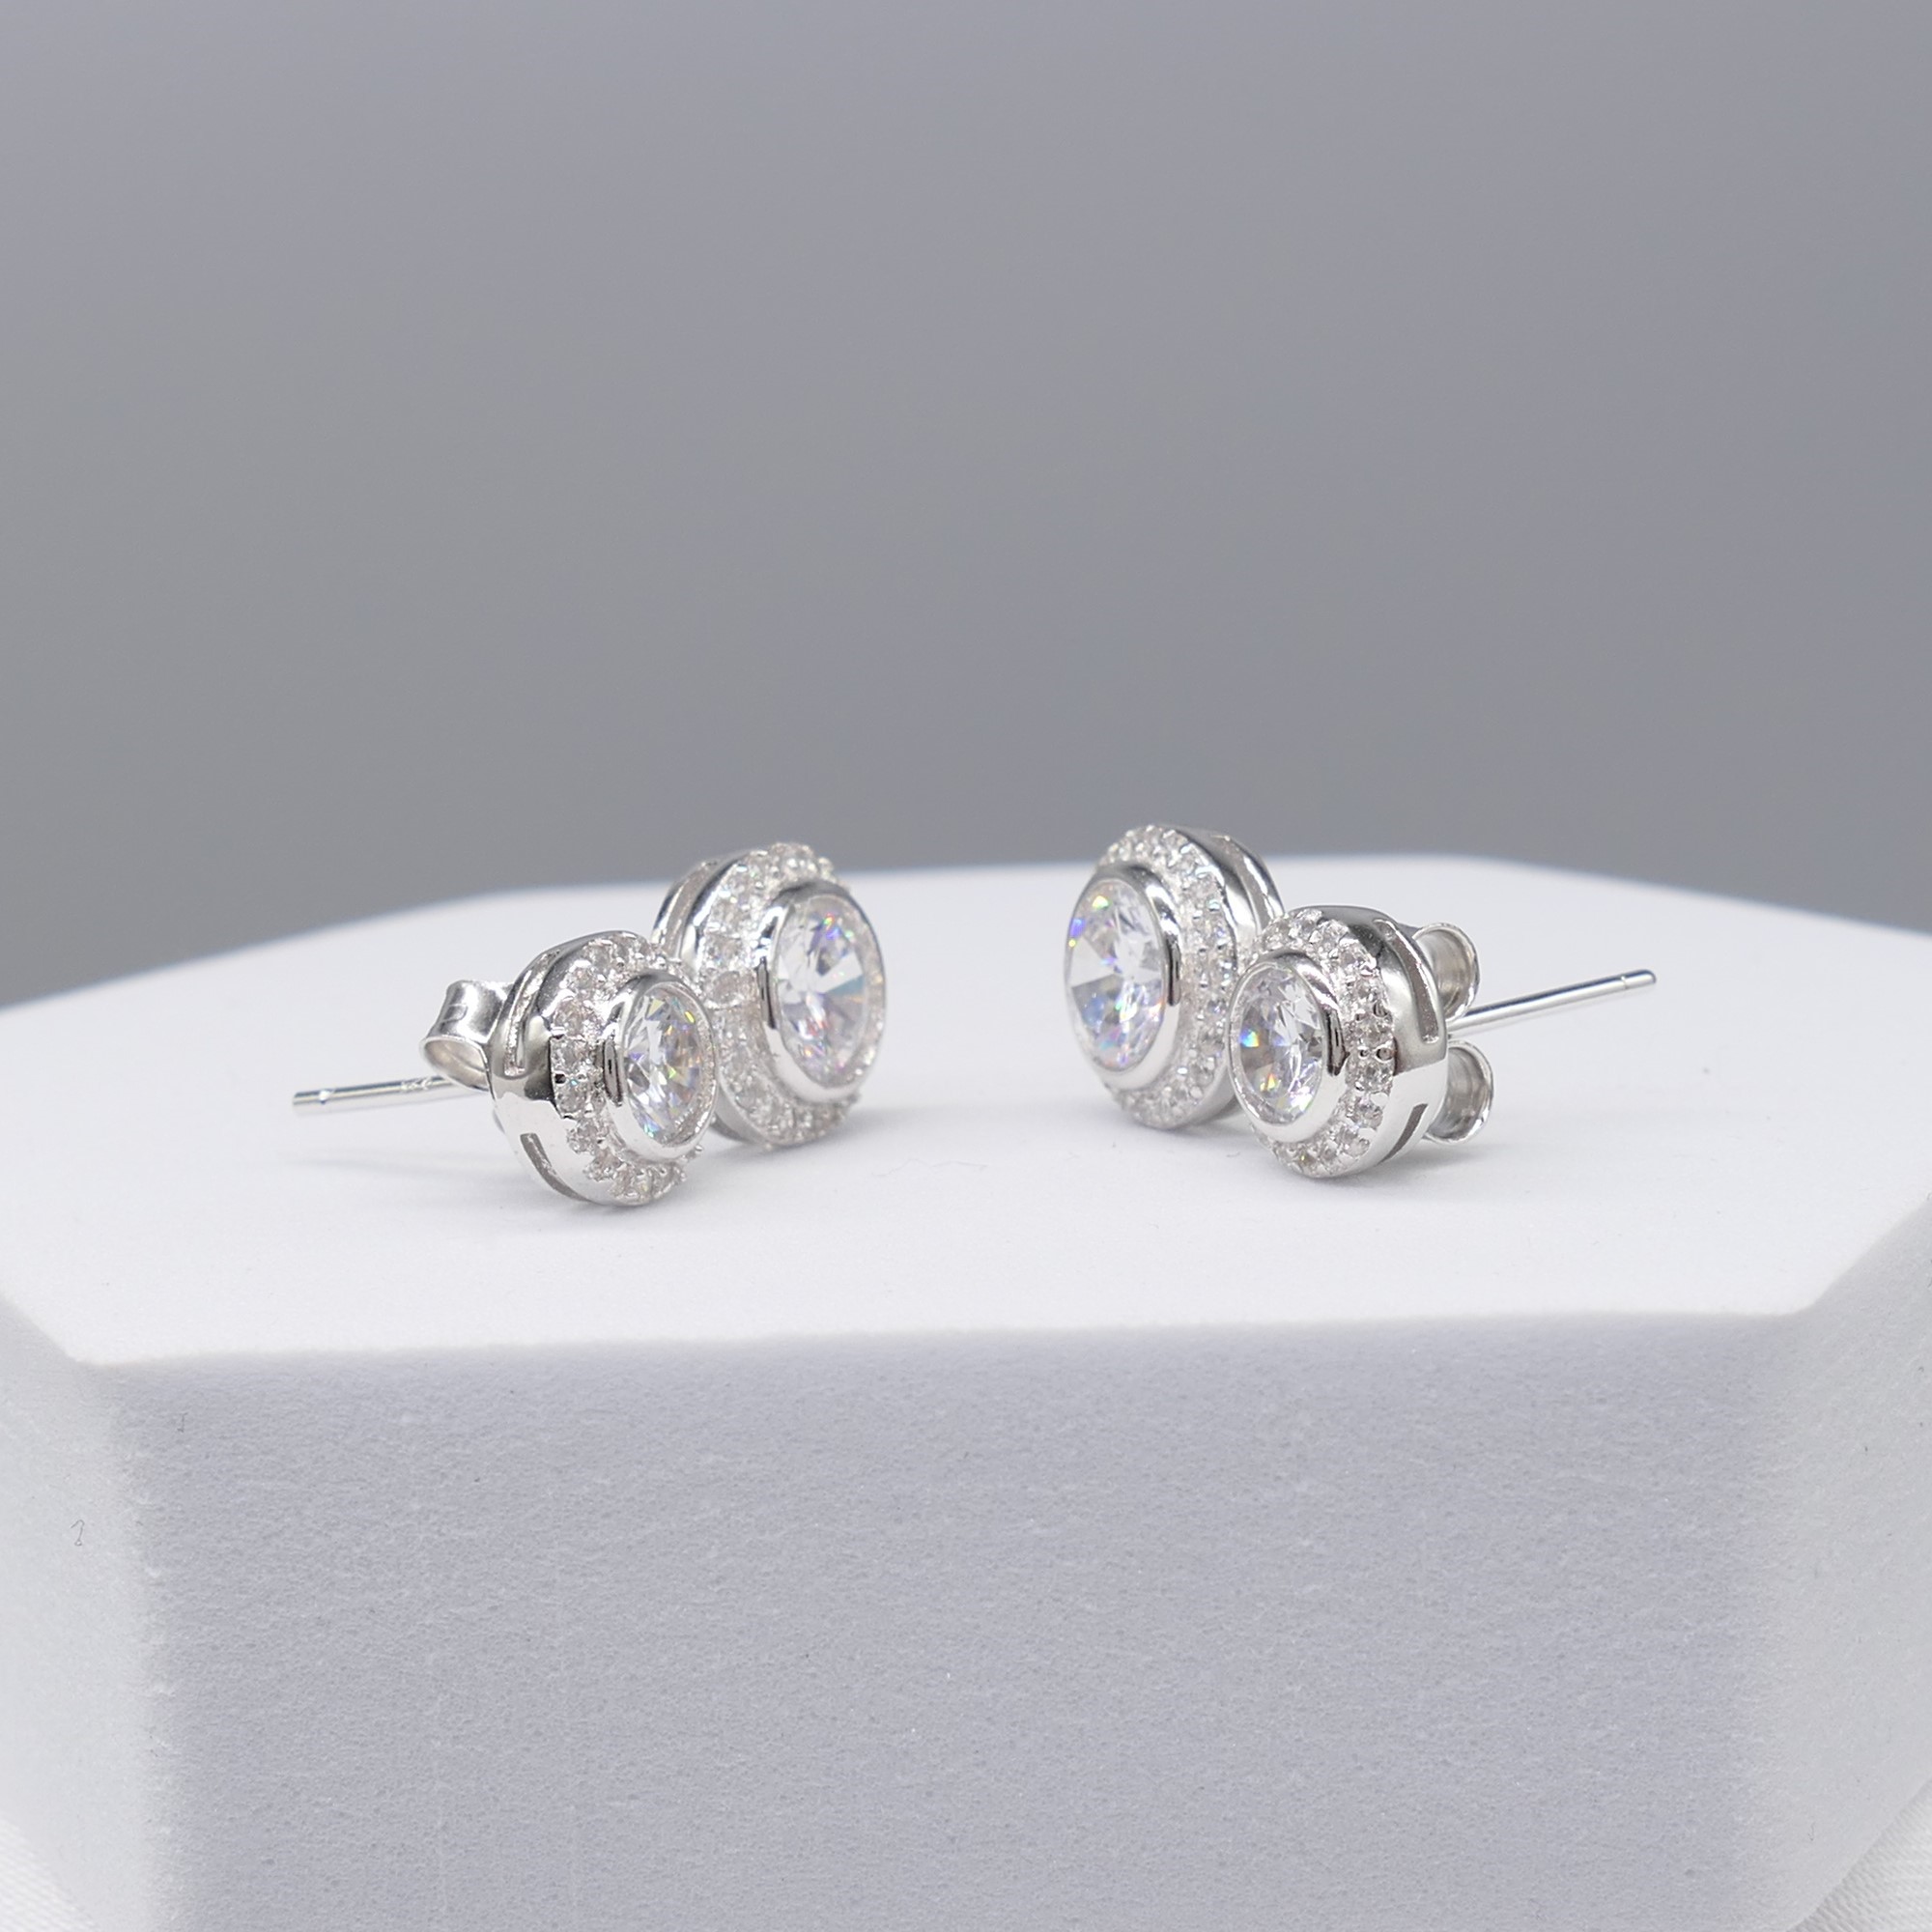 Gem-set double halo droplet earrings in silver - Image 2 of 6